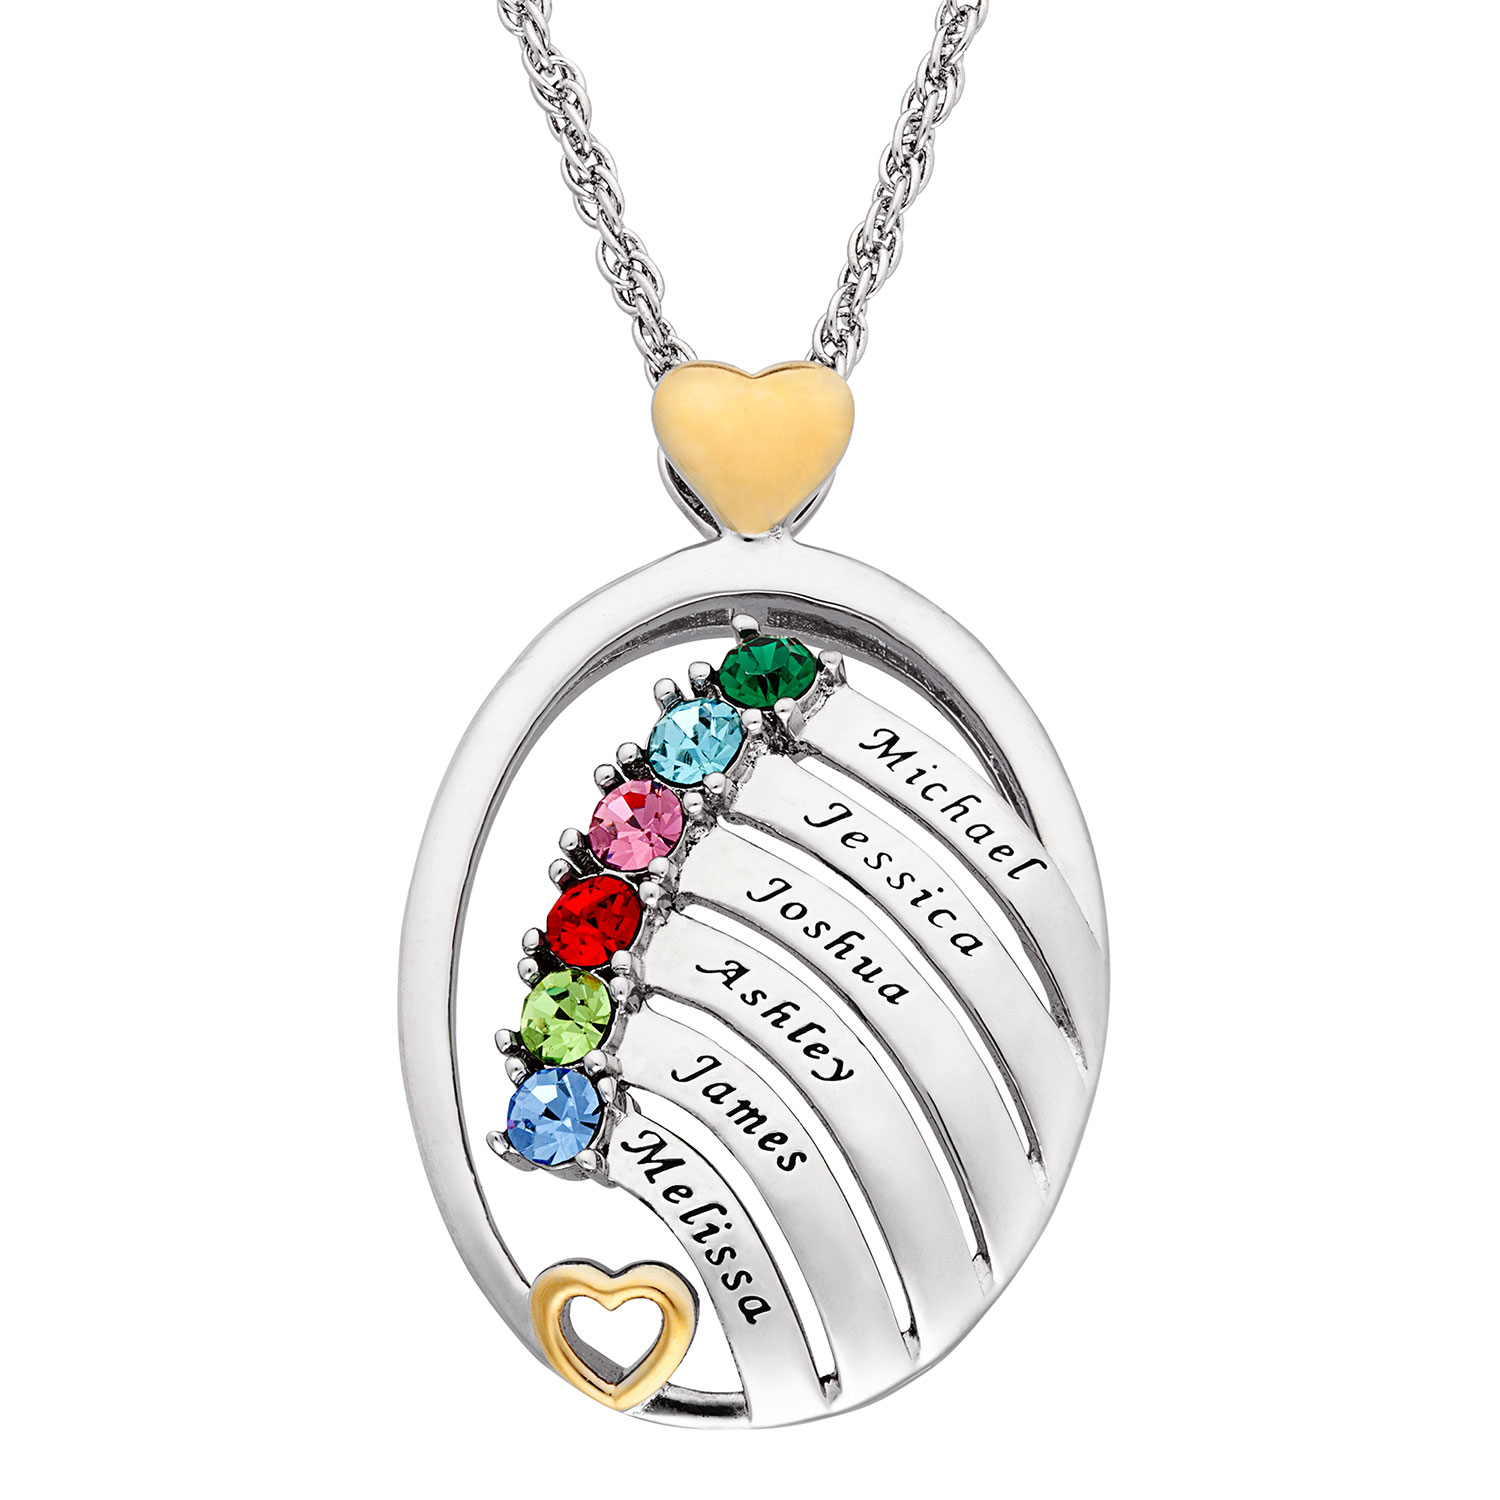  Two-Tone Oval Name and Birthstone Hearts Pendant